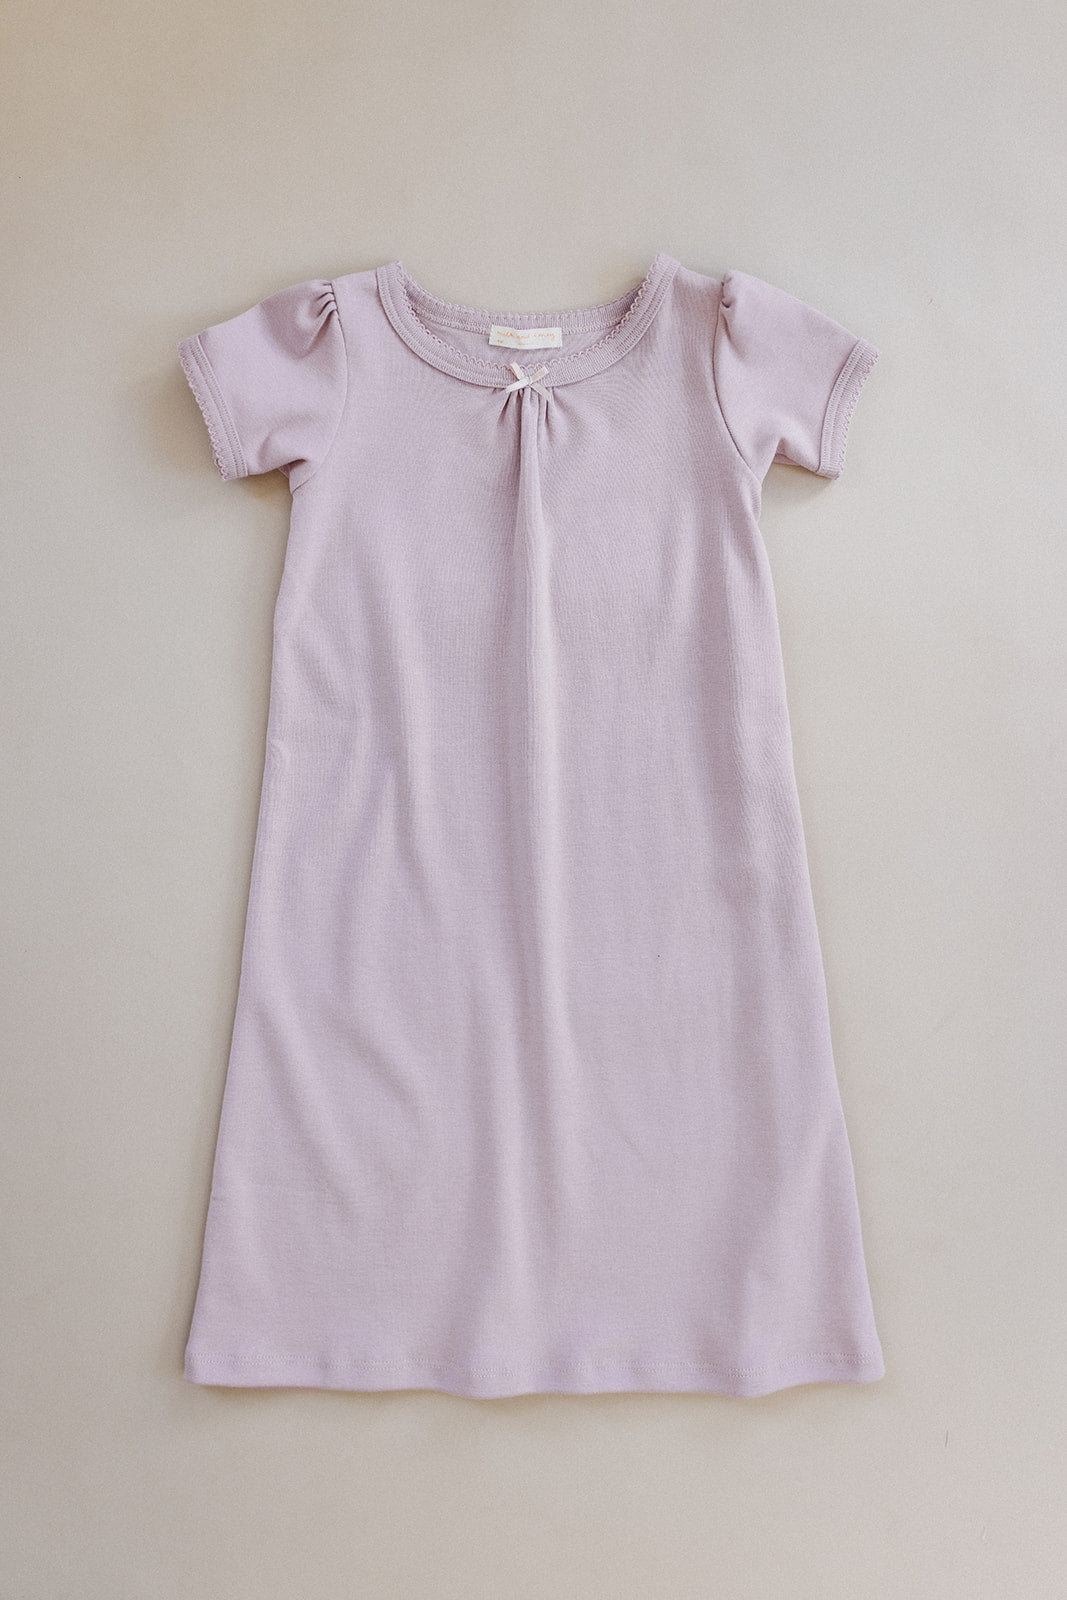 nightgown, lilac